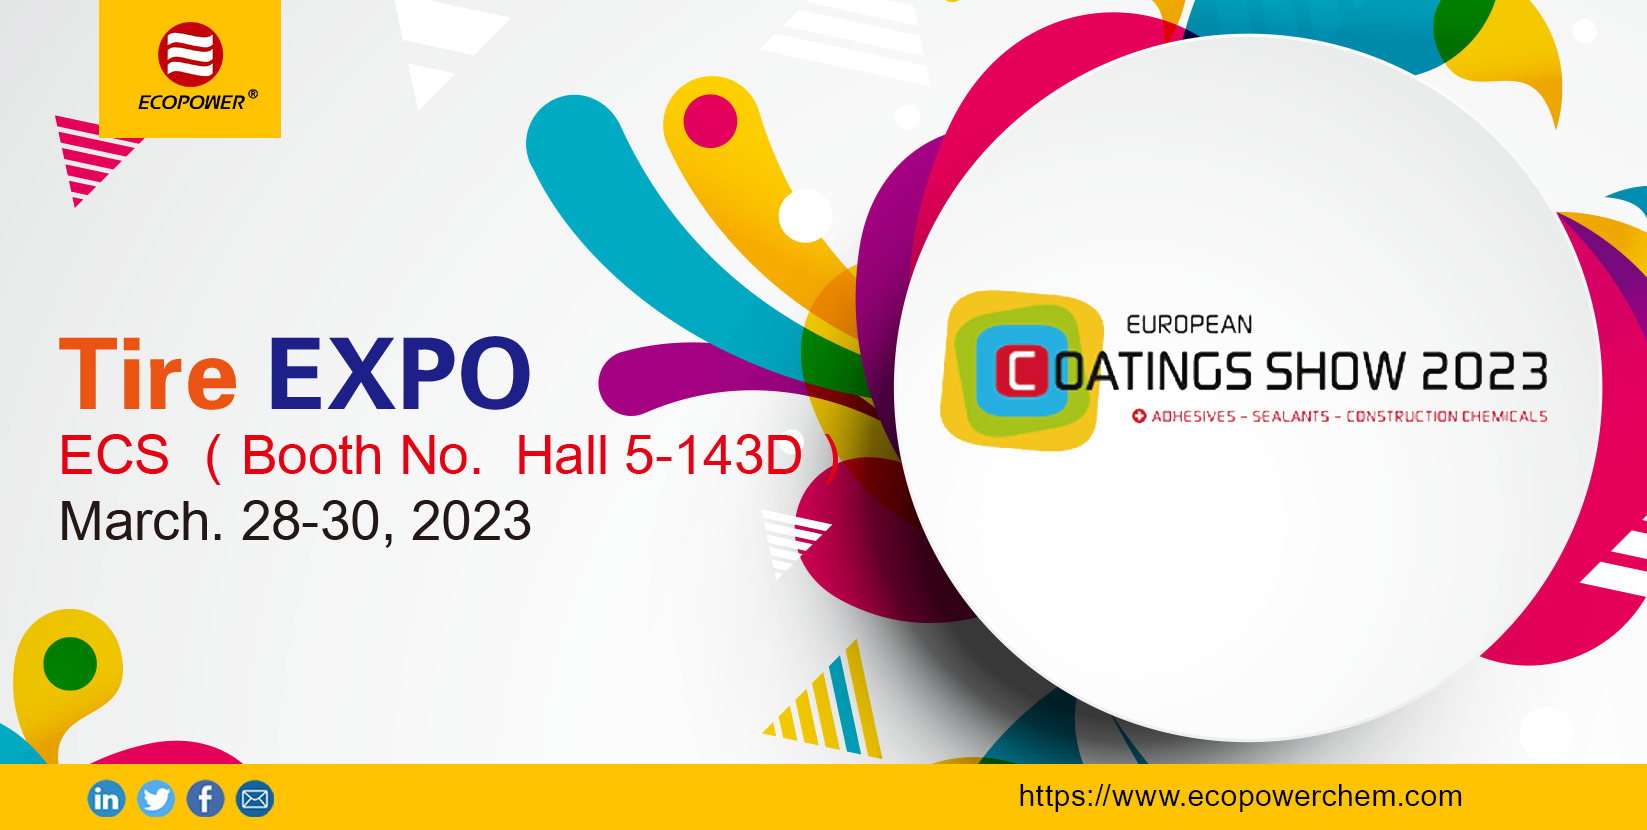 European Coatings Show 2023 - Booth No. Hall 5-143D March 28-30